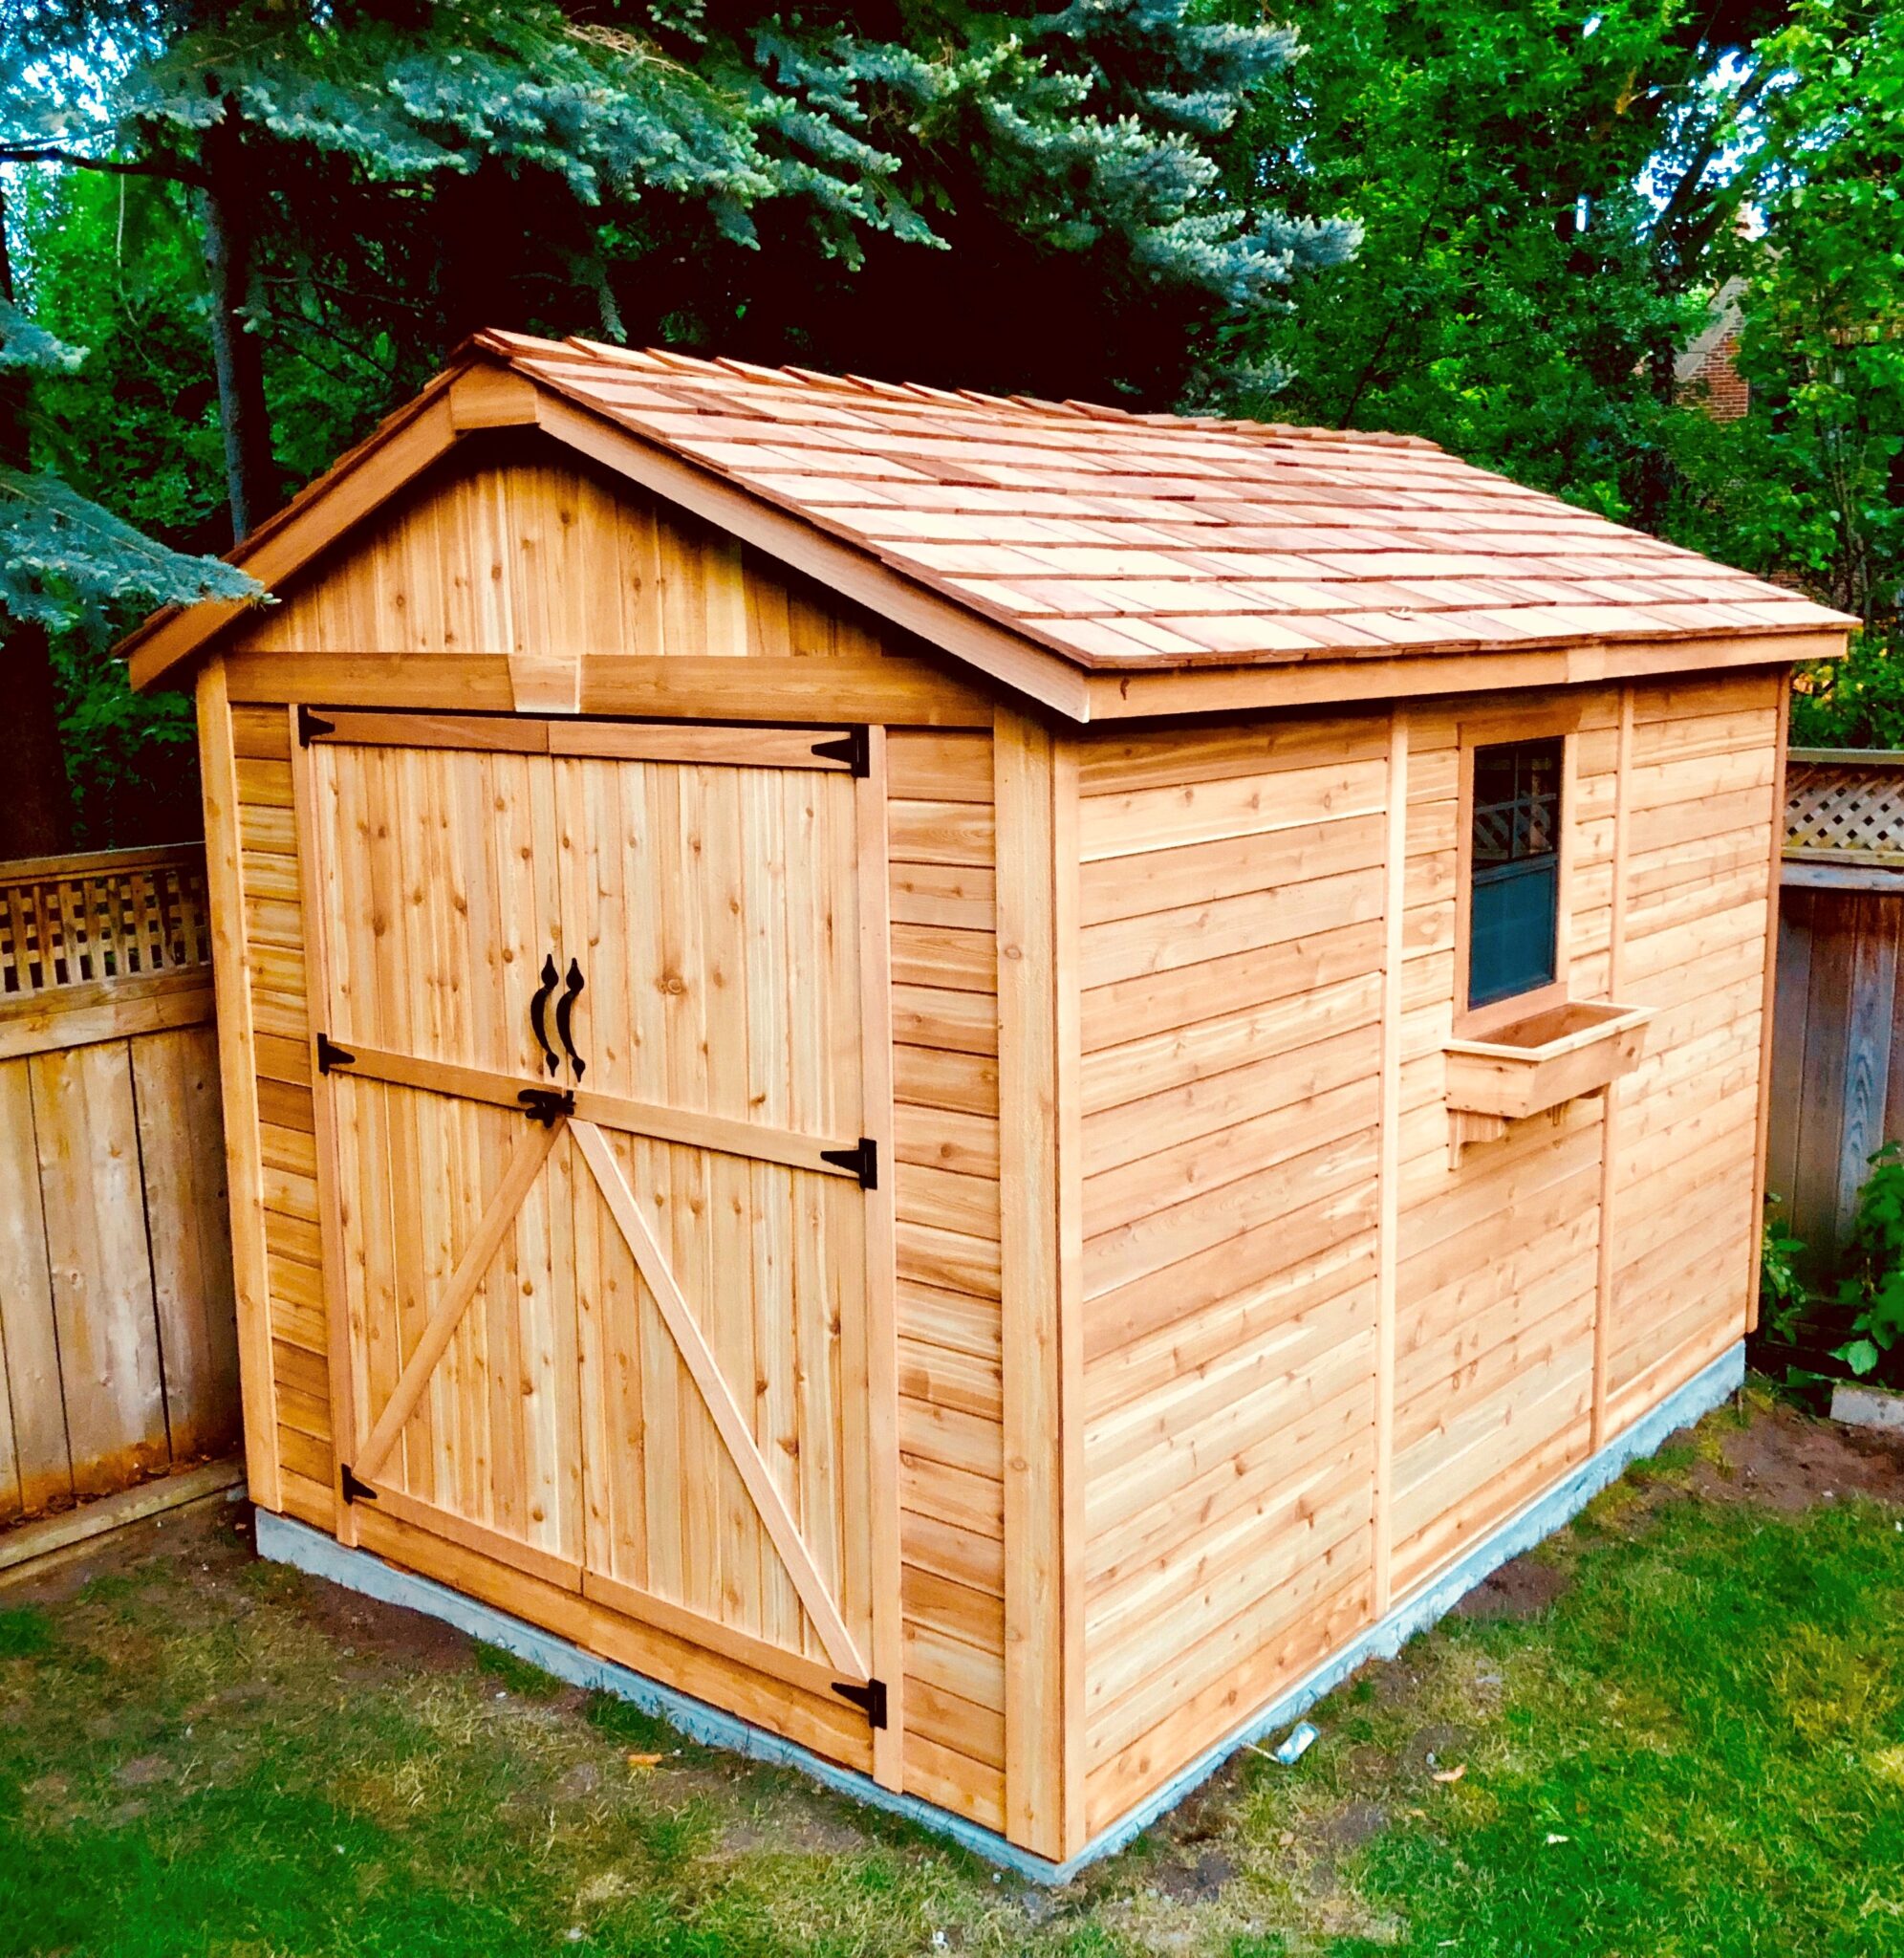 Storage Sheds | SpaceMaker 8 x 12 - Outdoor Living Today